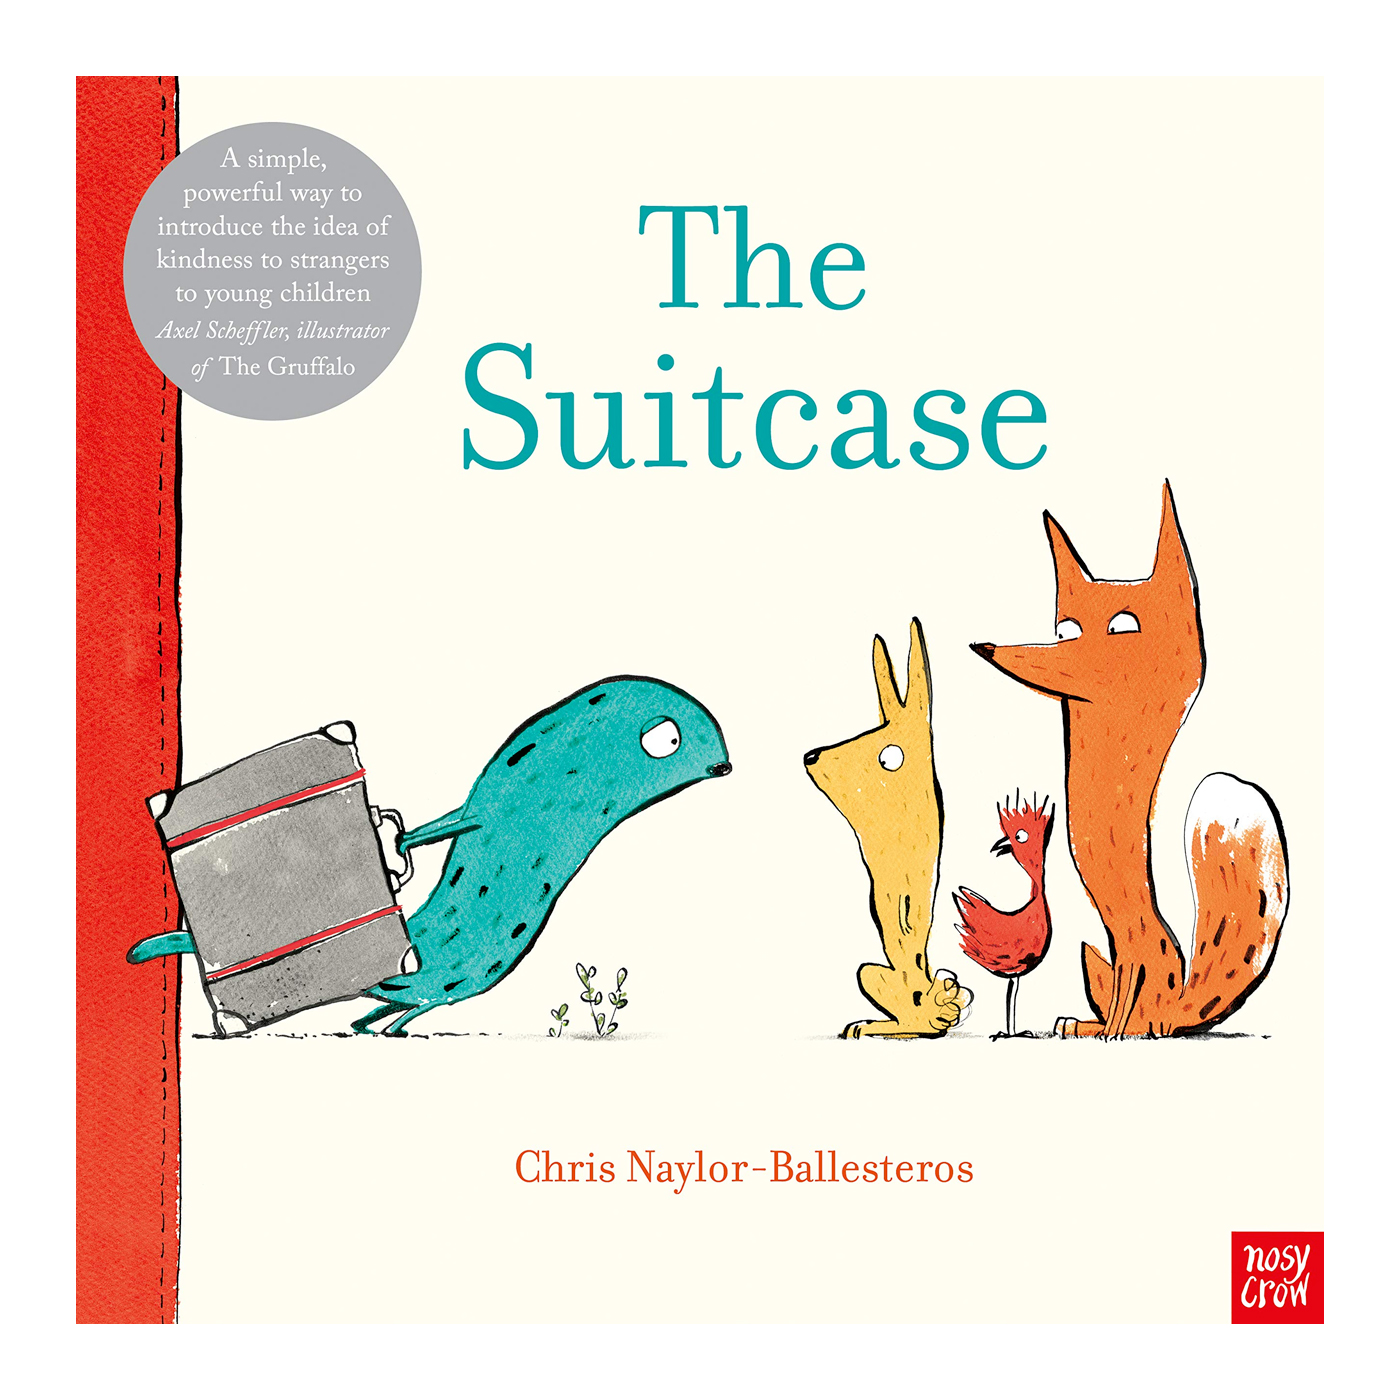  The Suitcase